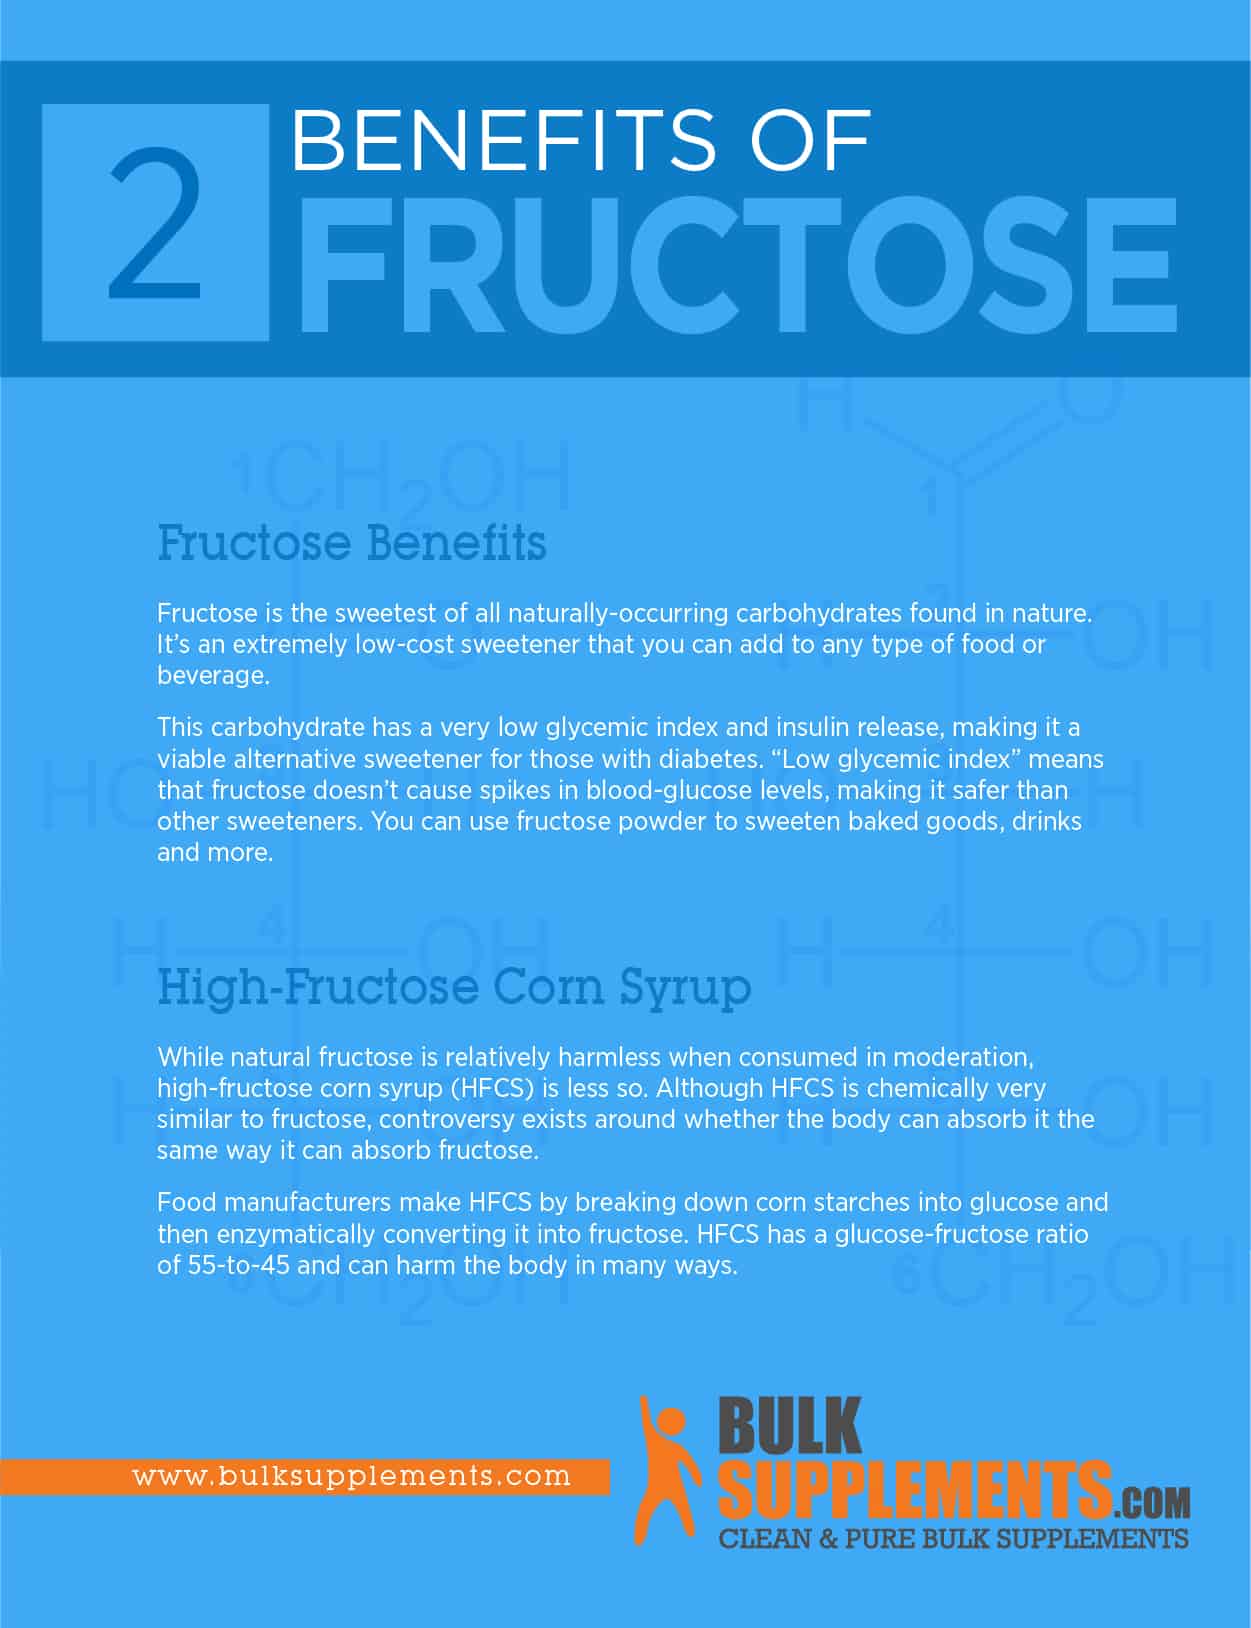 Fructose Benefits